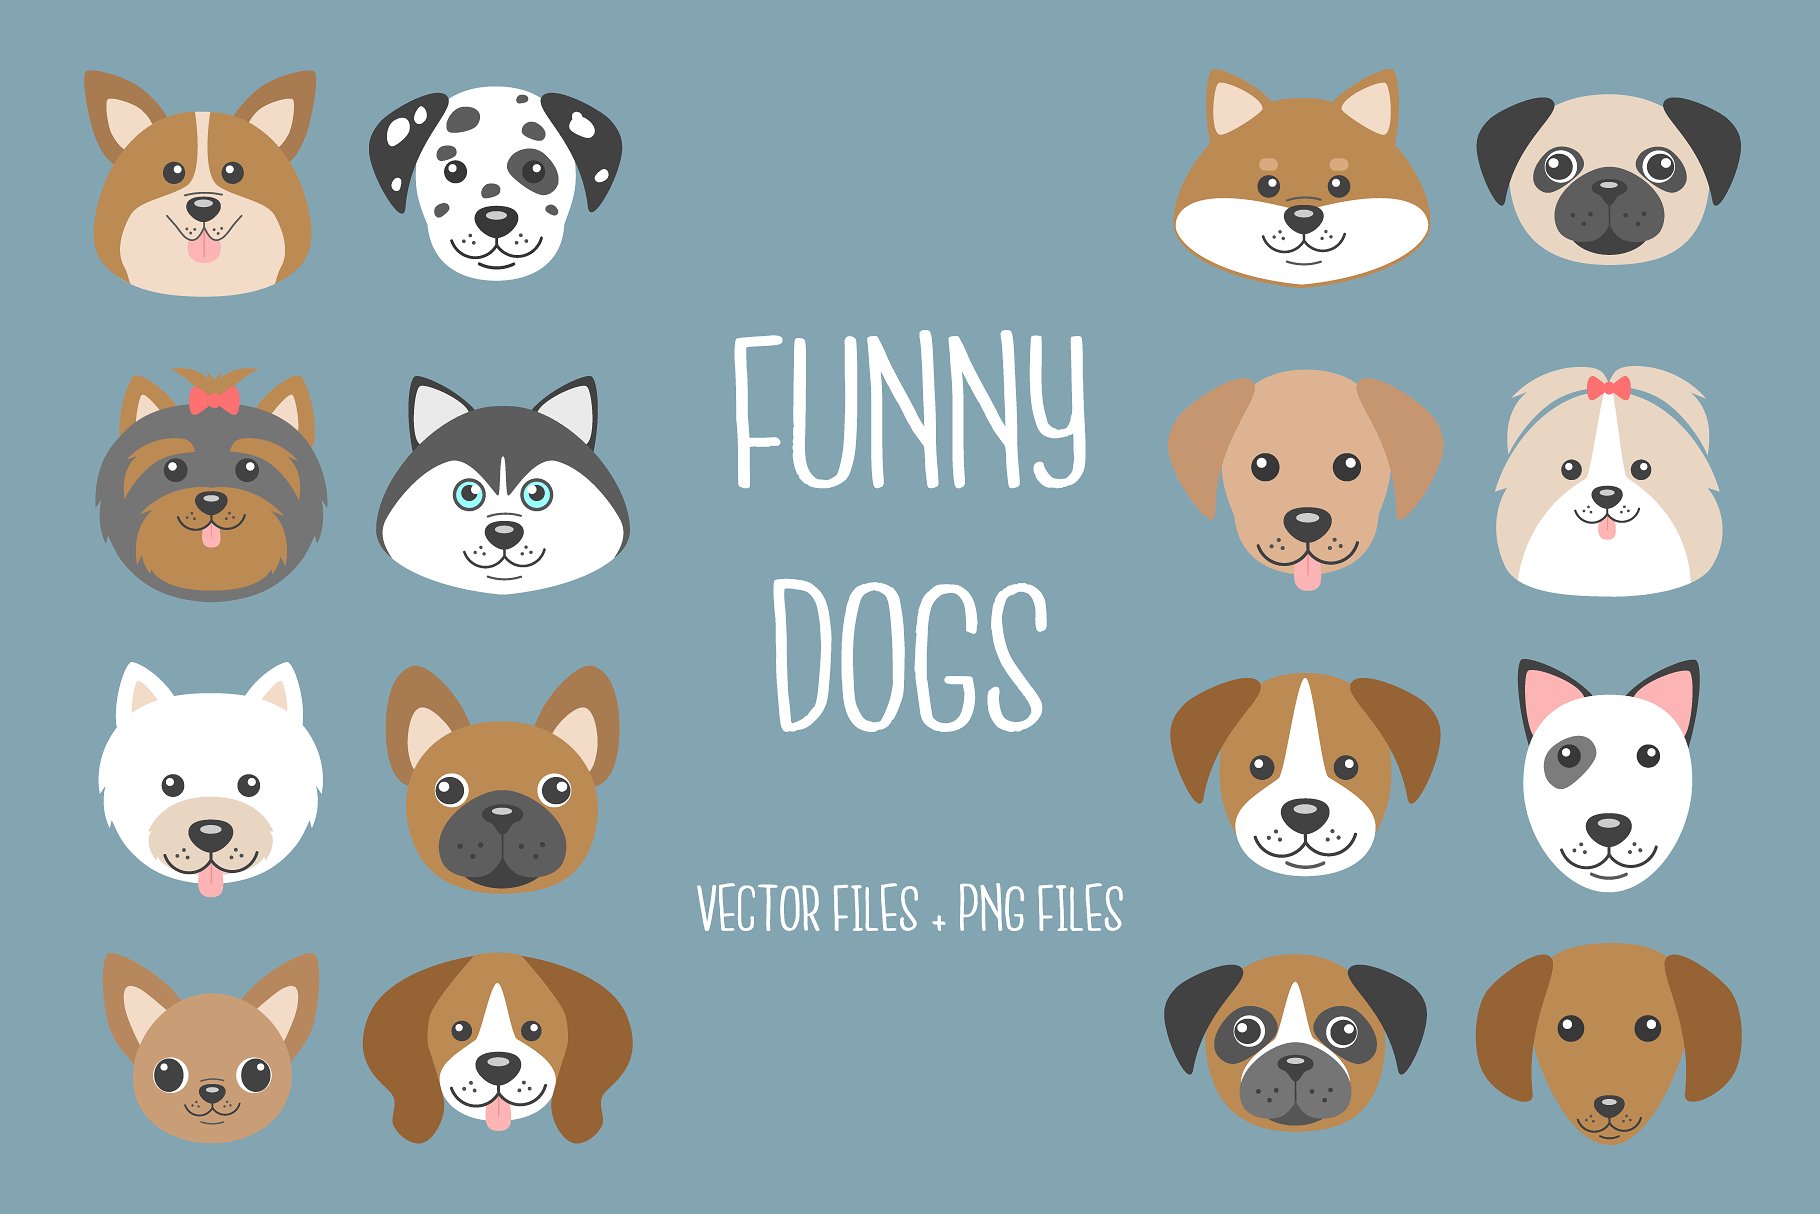 Funny Dogs preview image.